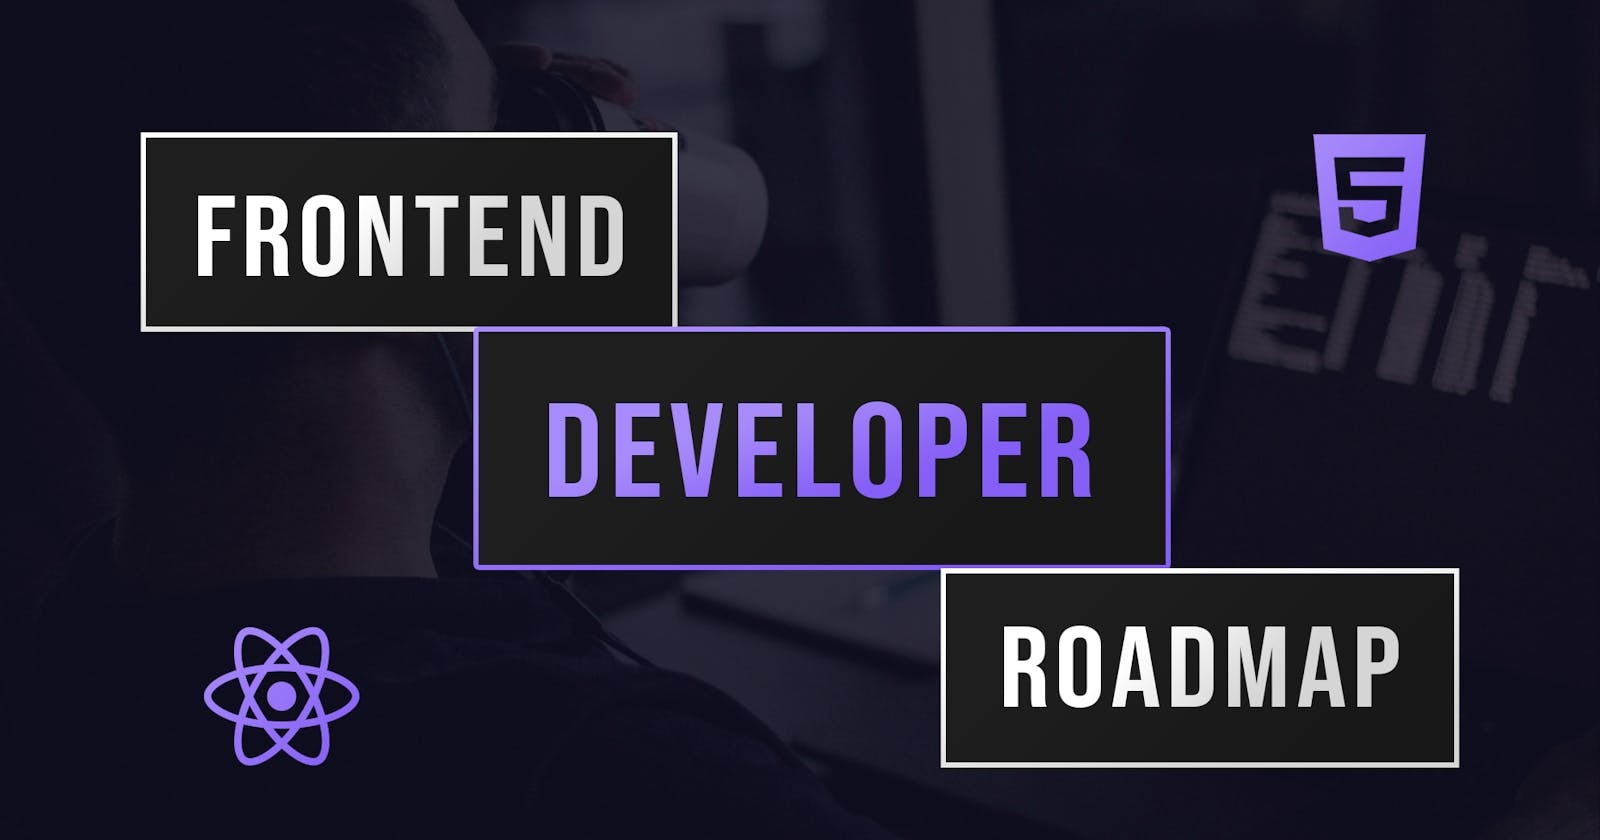 Frontend Developer Roadmap, Guide and Resources